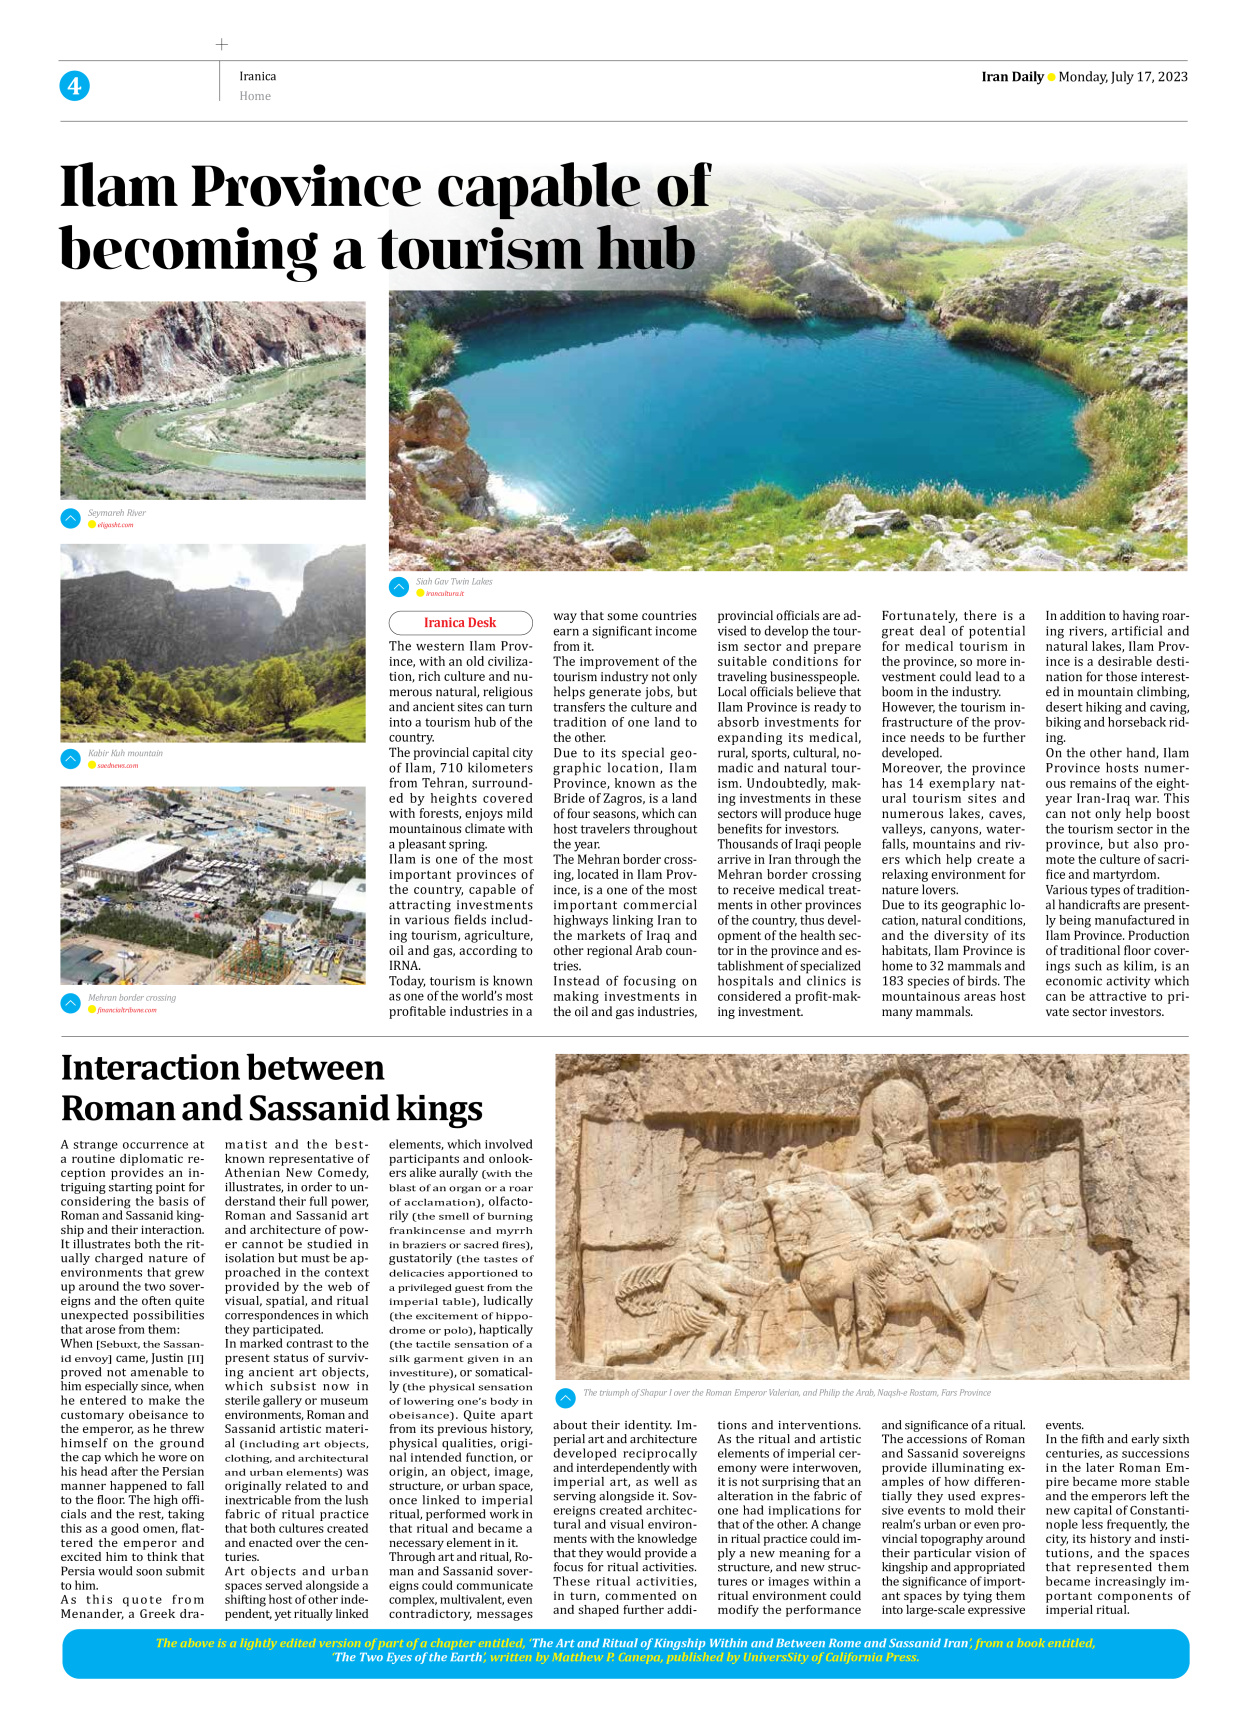 Iran Daily - Number Seven Thousand Three Hundred and Forty One - 17 July 2023 - Page 4